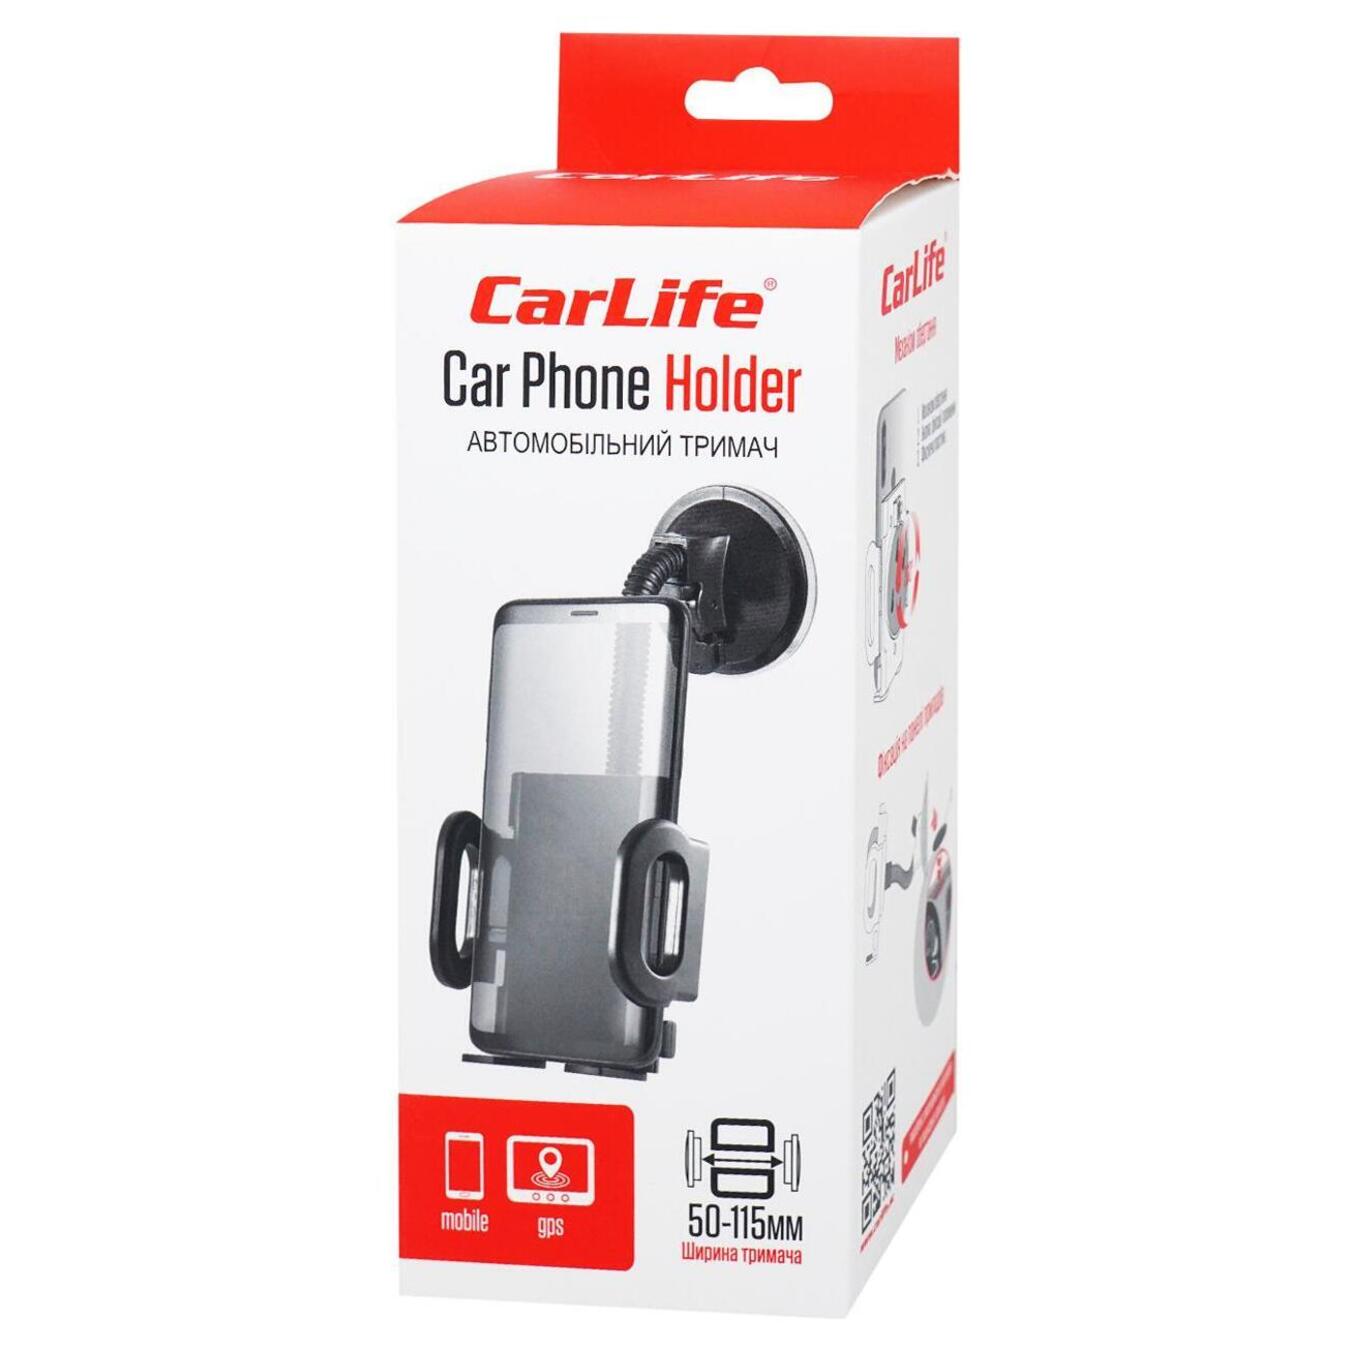 Car Life car holder for a mobile phone 50*115mm